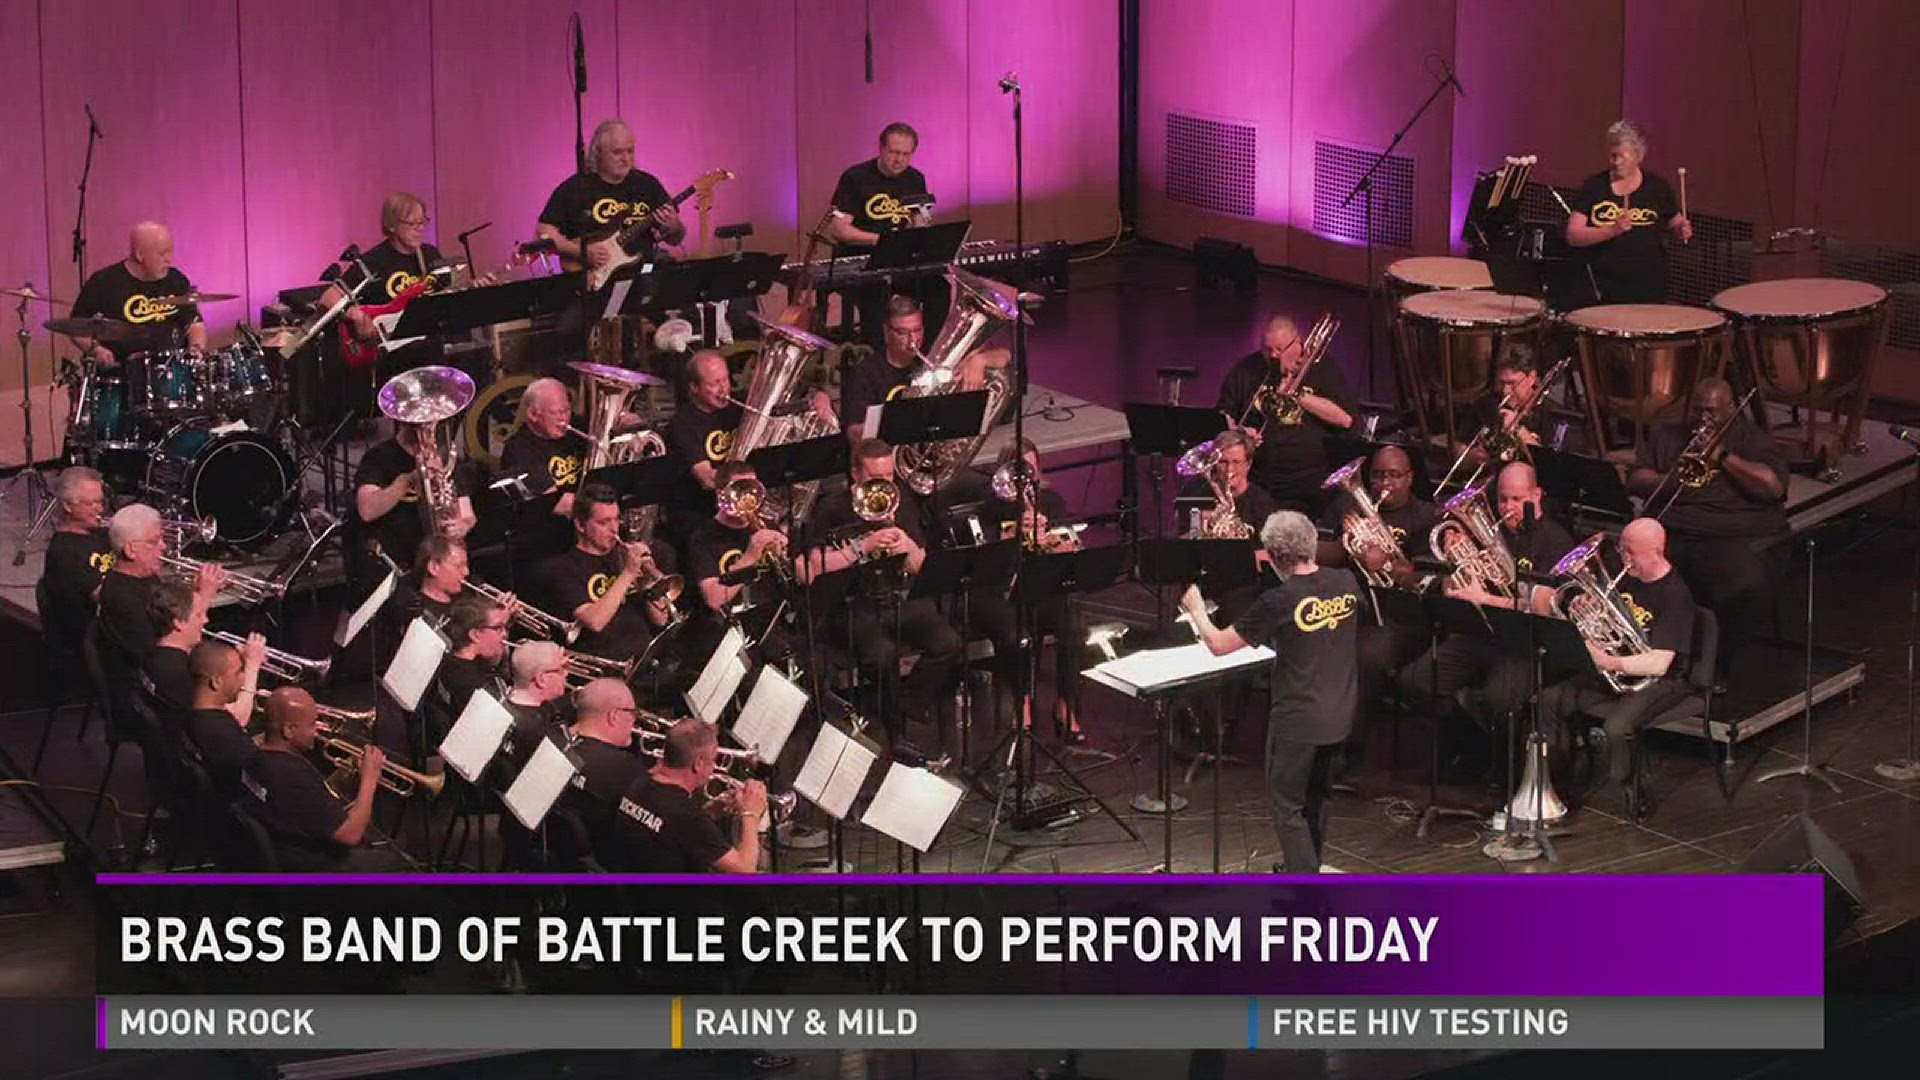 Jennifer Rupp, executive director of the Brass Band of Battle Creek, joins WZZM to discuss the Dec. 2 event.